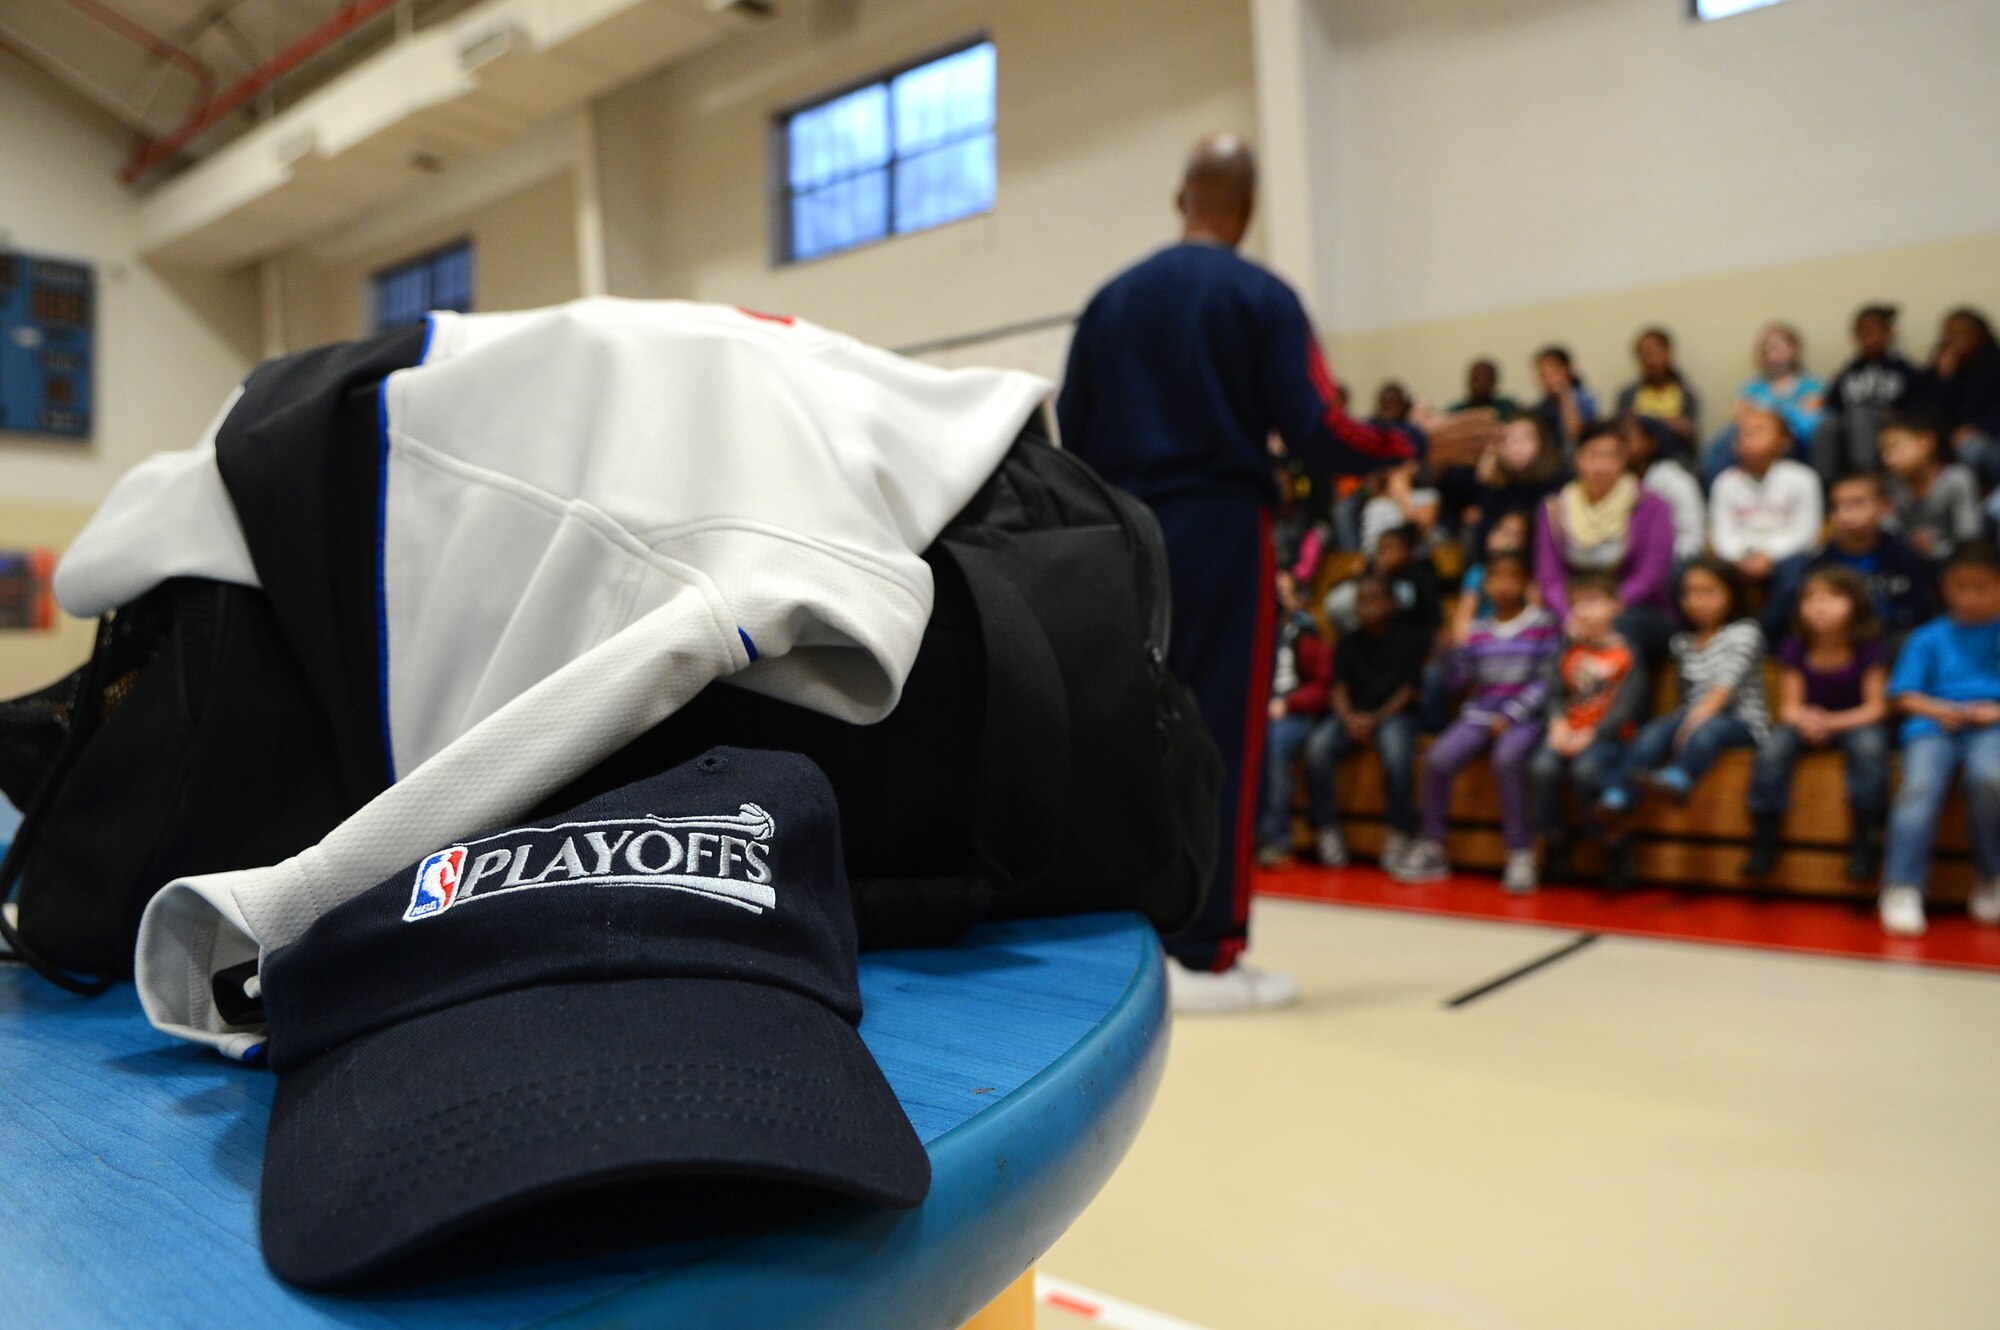 A National Basketball Association hat along with the belongings of Derrick Stafford, NBA referee, sits on a table as Stafford speaks to kids at the Shaw Air Force Base youth center, S.C., Dec. 14, 2012.  Stafford is in his 25th NBA season and has served twice on the executive board of the NBA Referee Association.  (U.S. Air Force photo by Airman 1st Class Nicole Sikorski/Released)